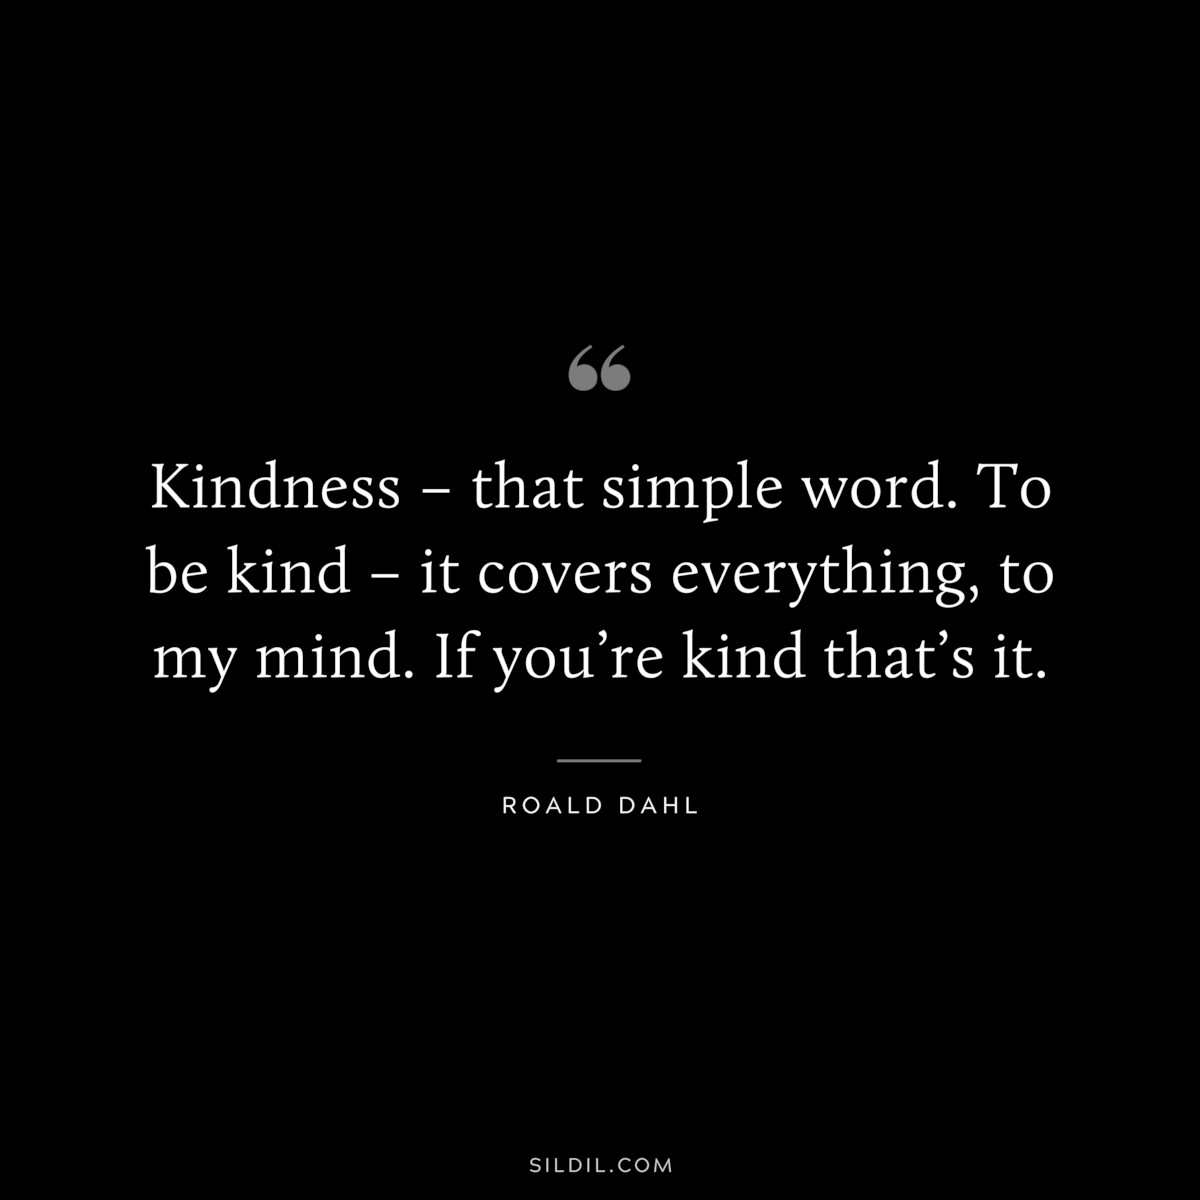 Kindness – that simple word. To be kind – it covers everything, to my mind. If you’re kind that’s it. ― Roald Dahl